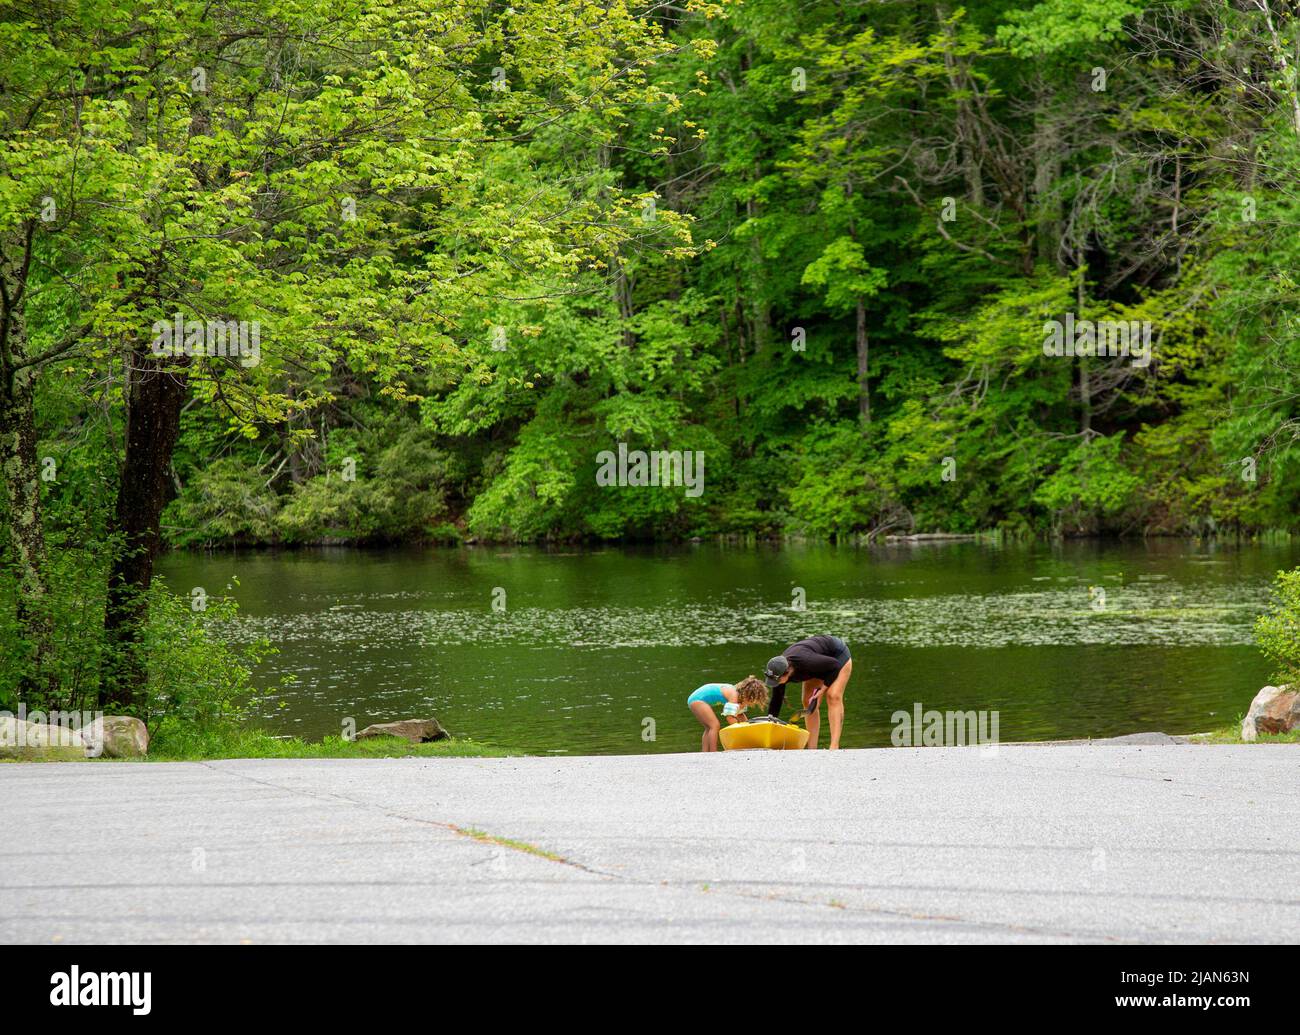 Mother and child putting a kayak into a lake Stock Photo